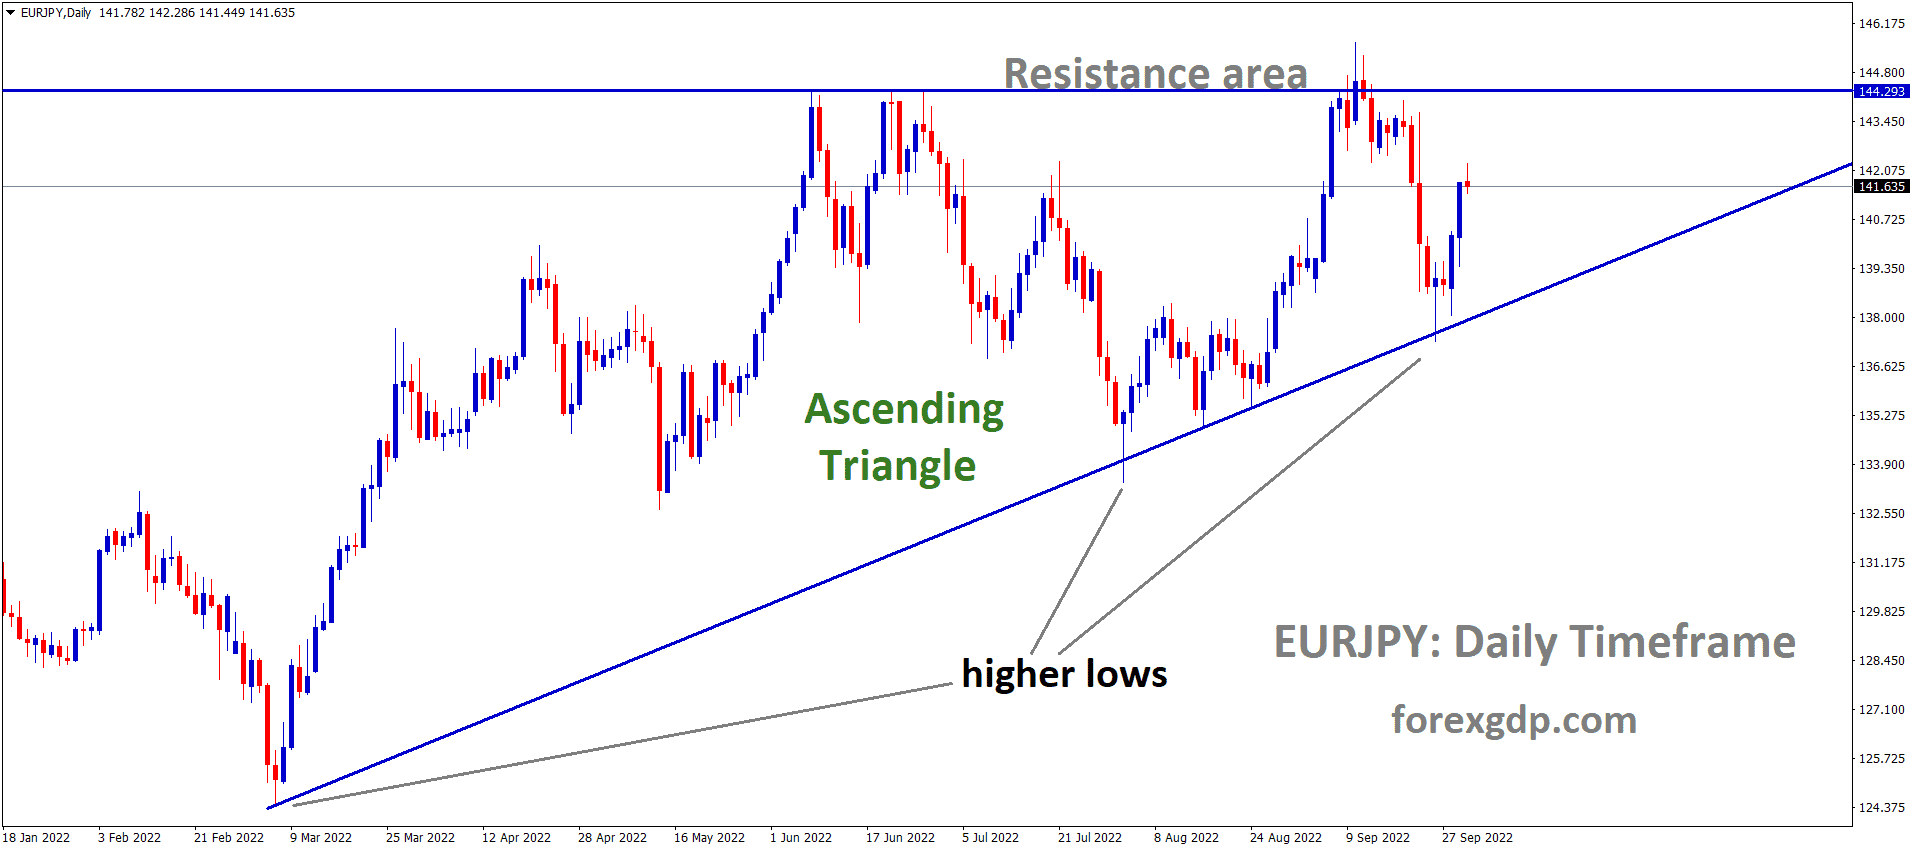 EURJPY is moving in an Ascending triangle pattern and the market has rebounded from the higher low area of the triangle pattern 1